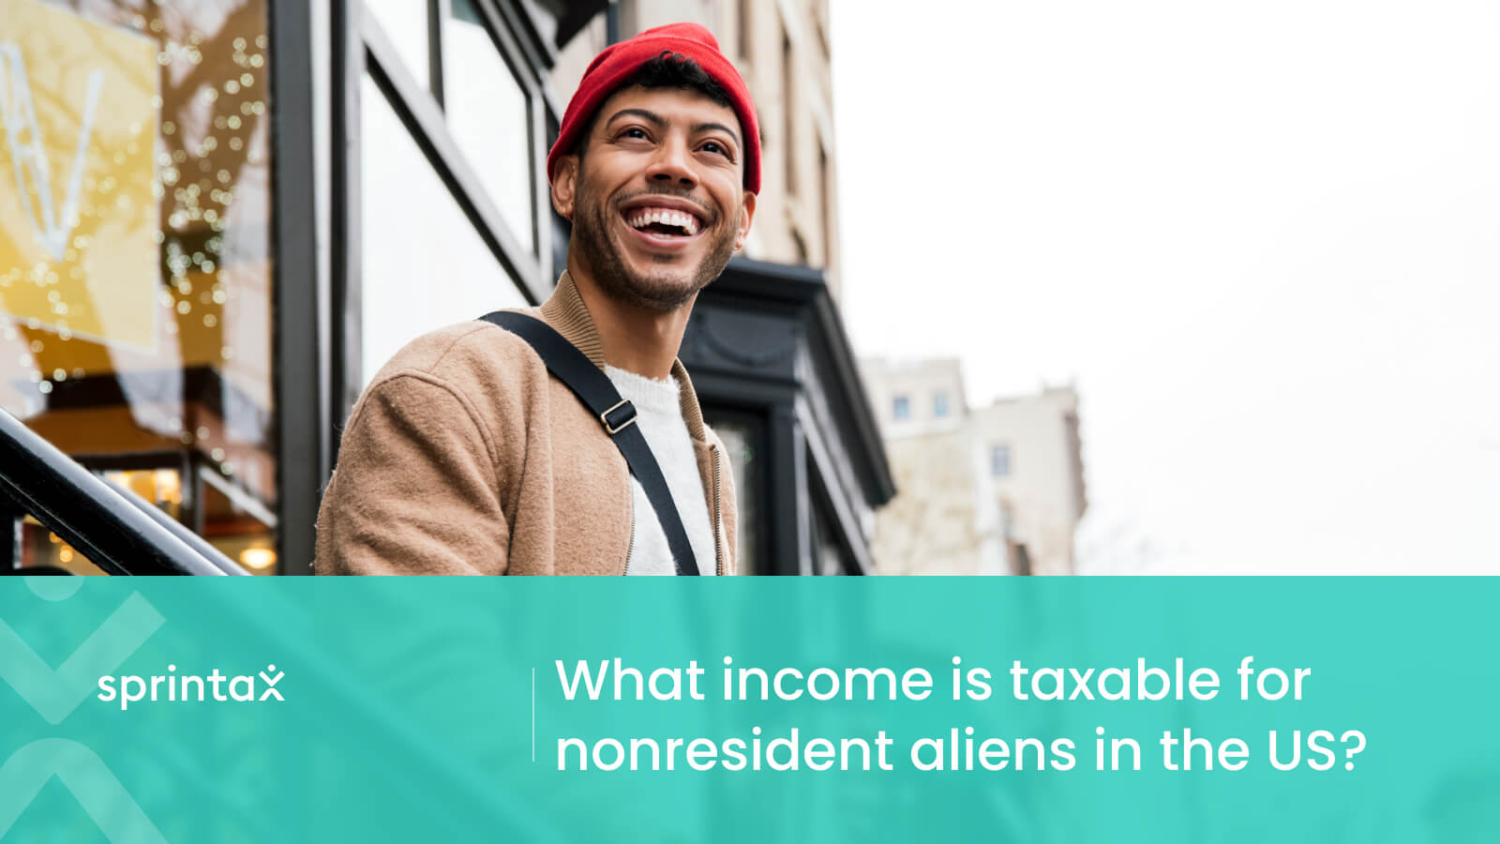 Taxable income of nonresident aliens